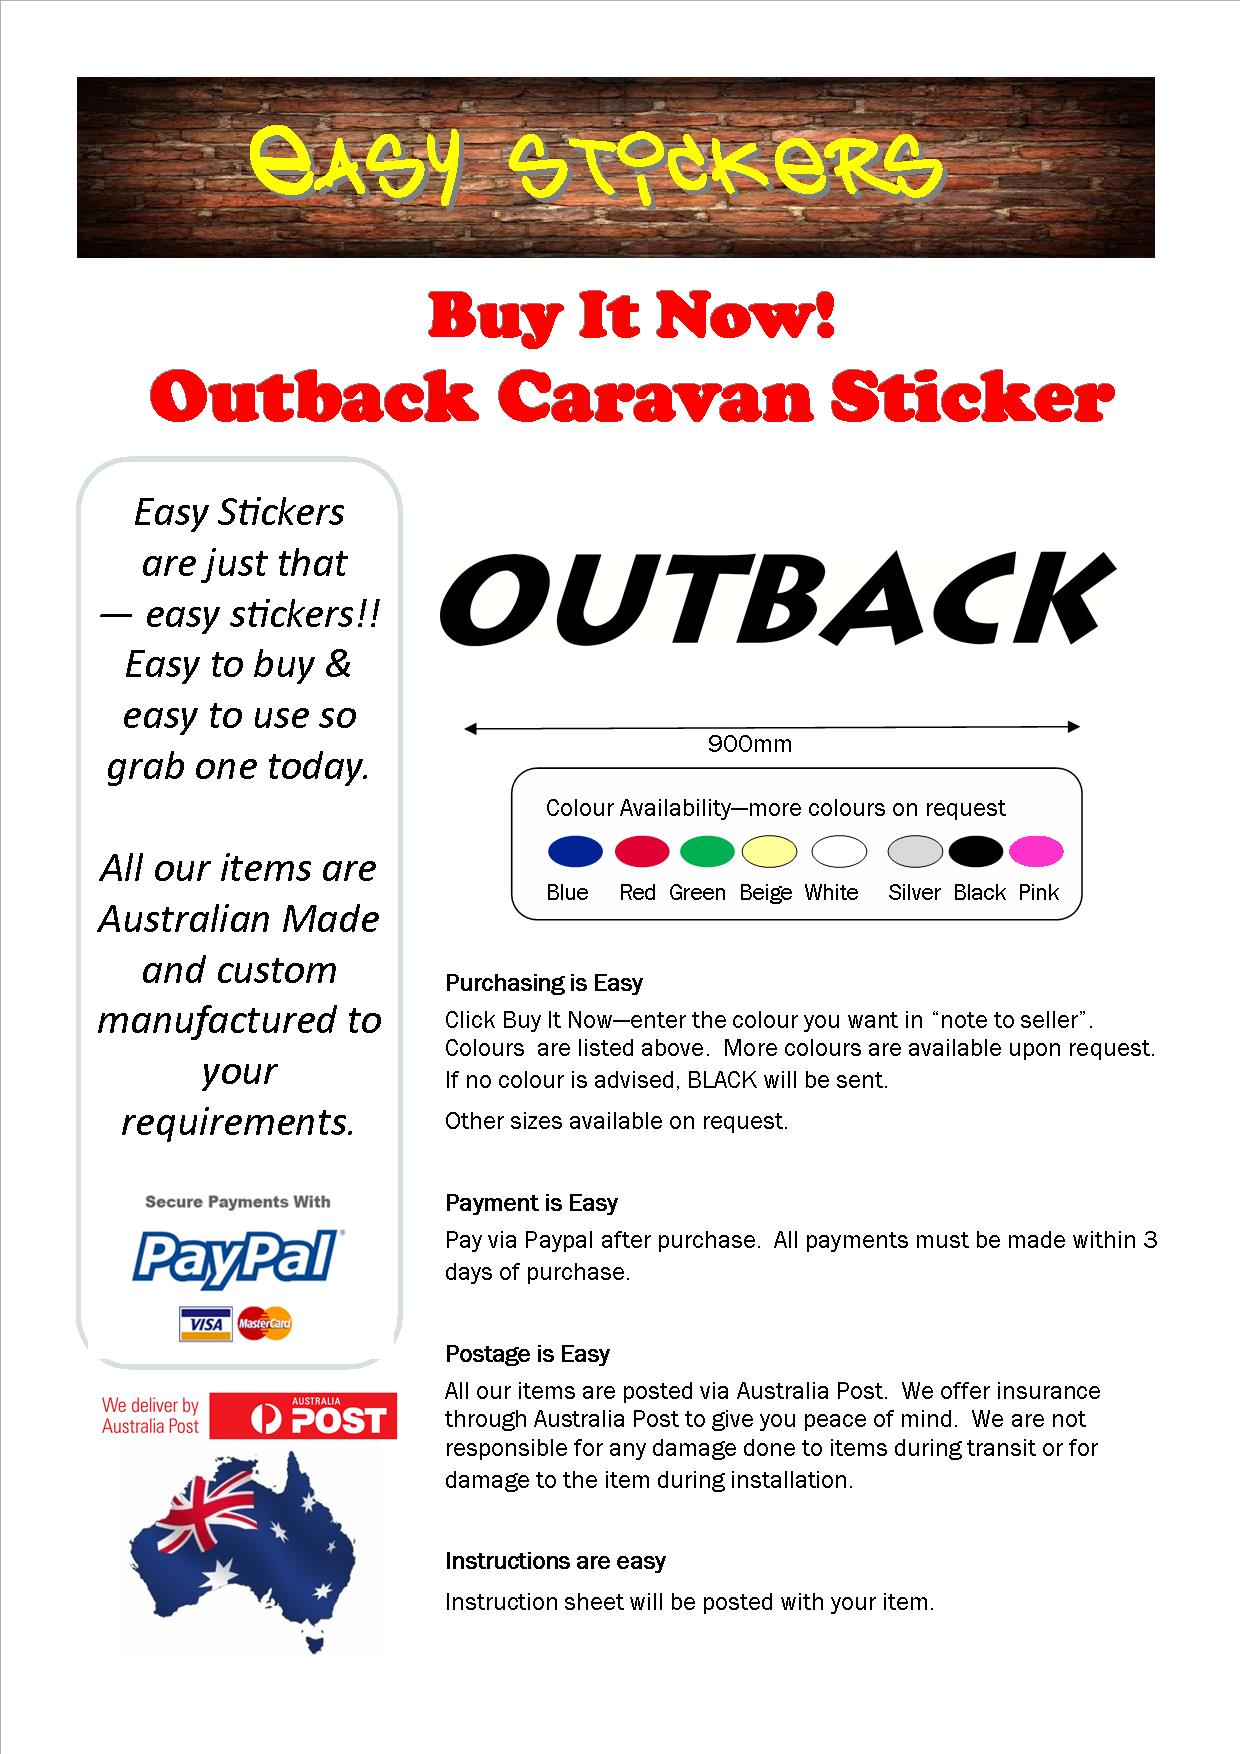 Ebay Template 900mm Outback.jpg  by easystickers